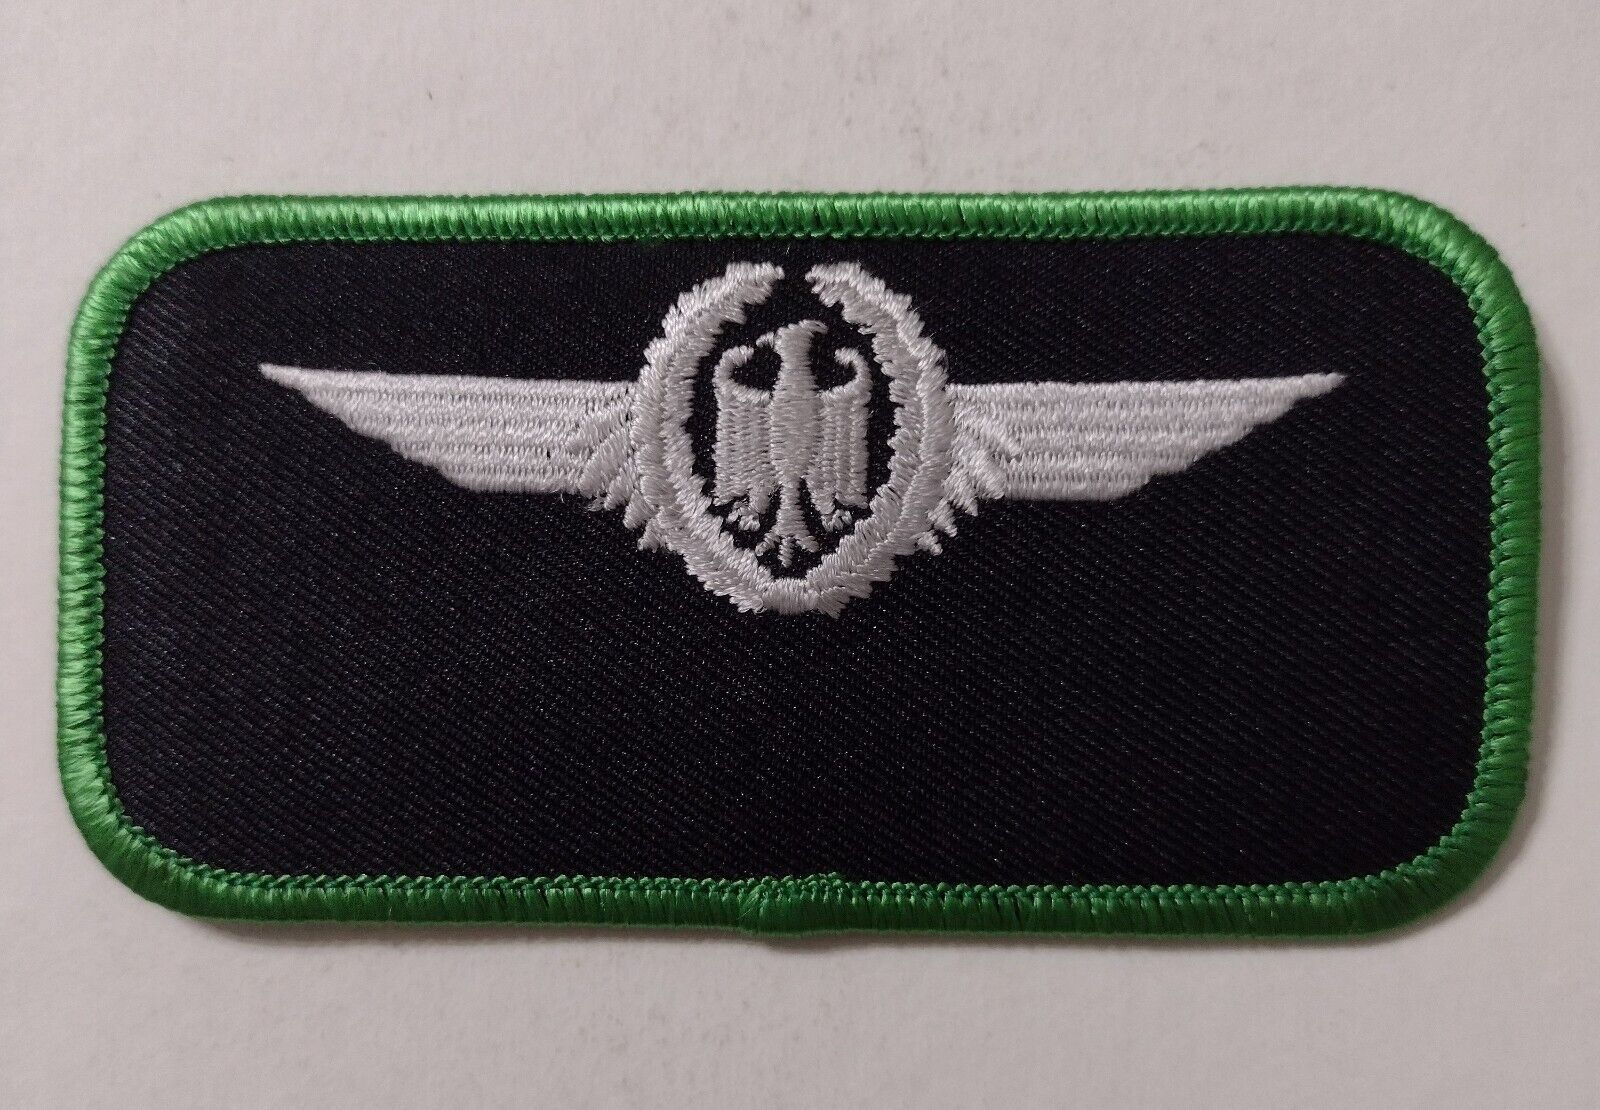 UNKNOWN MAY BE GERMANY PILOT AVIATOR SQUADRON FLIGHT SUIT NAME TAG STYLE 1 - $6.00